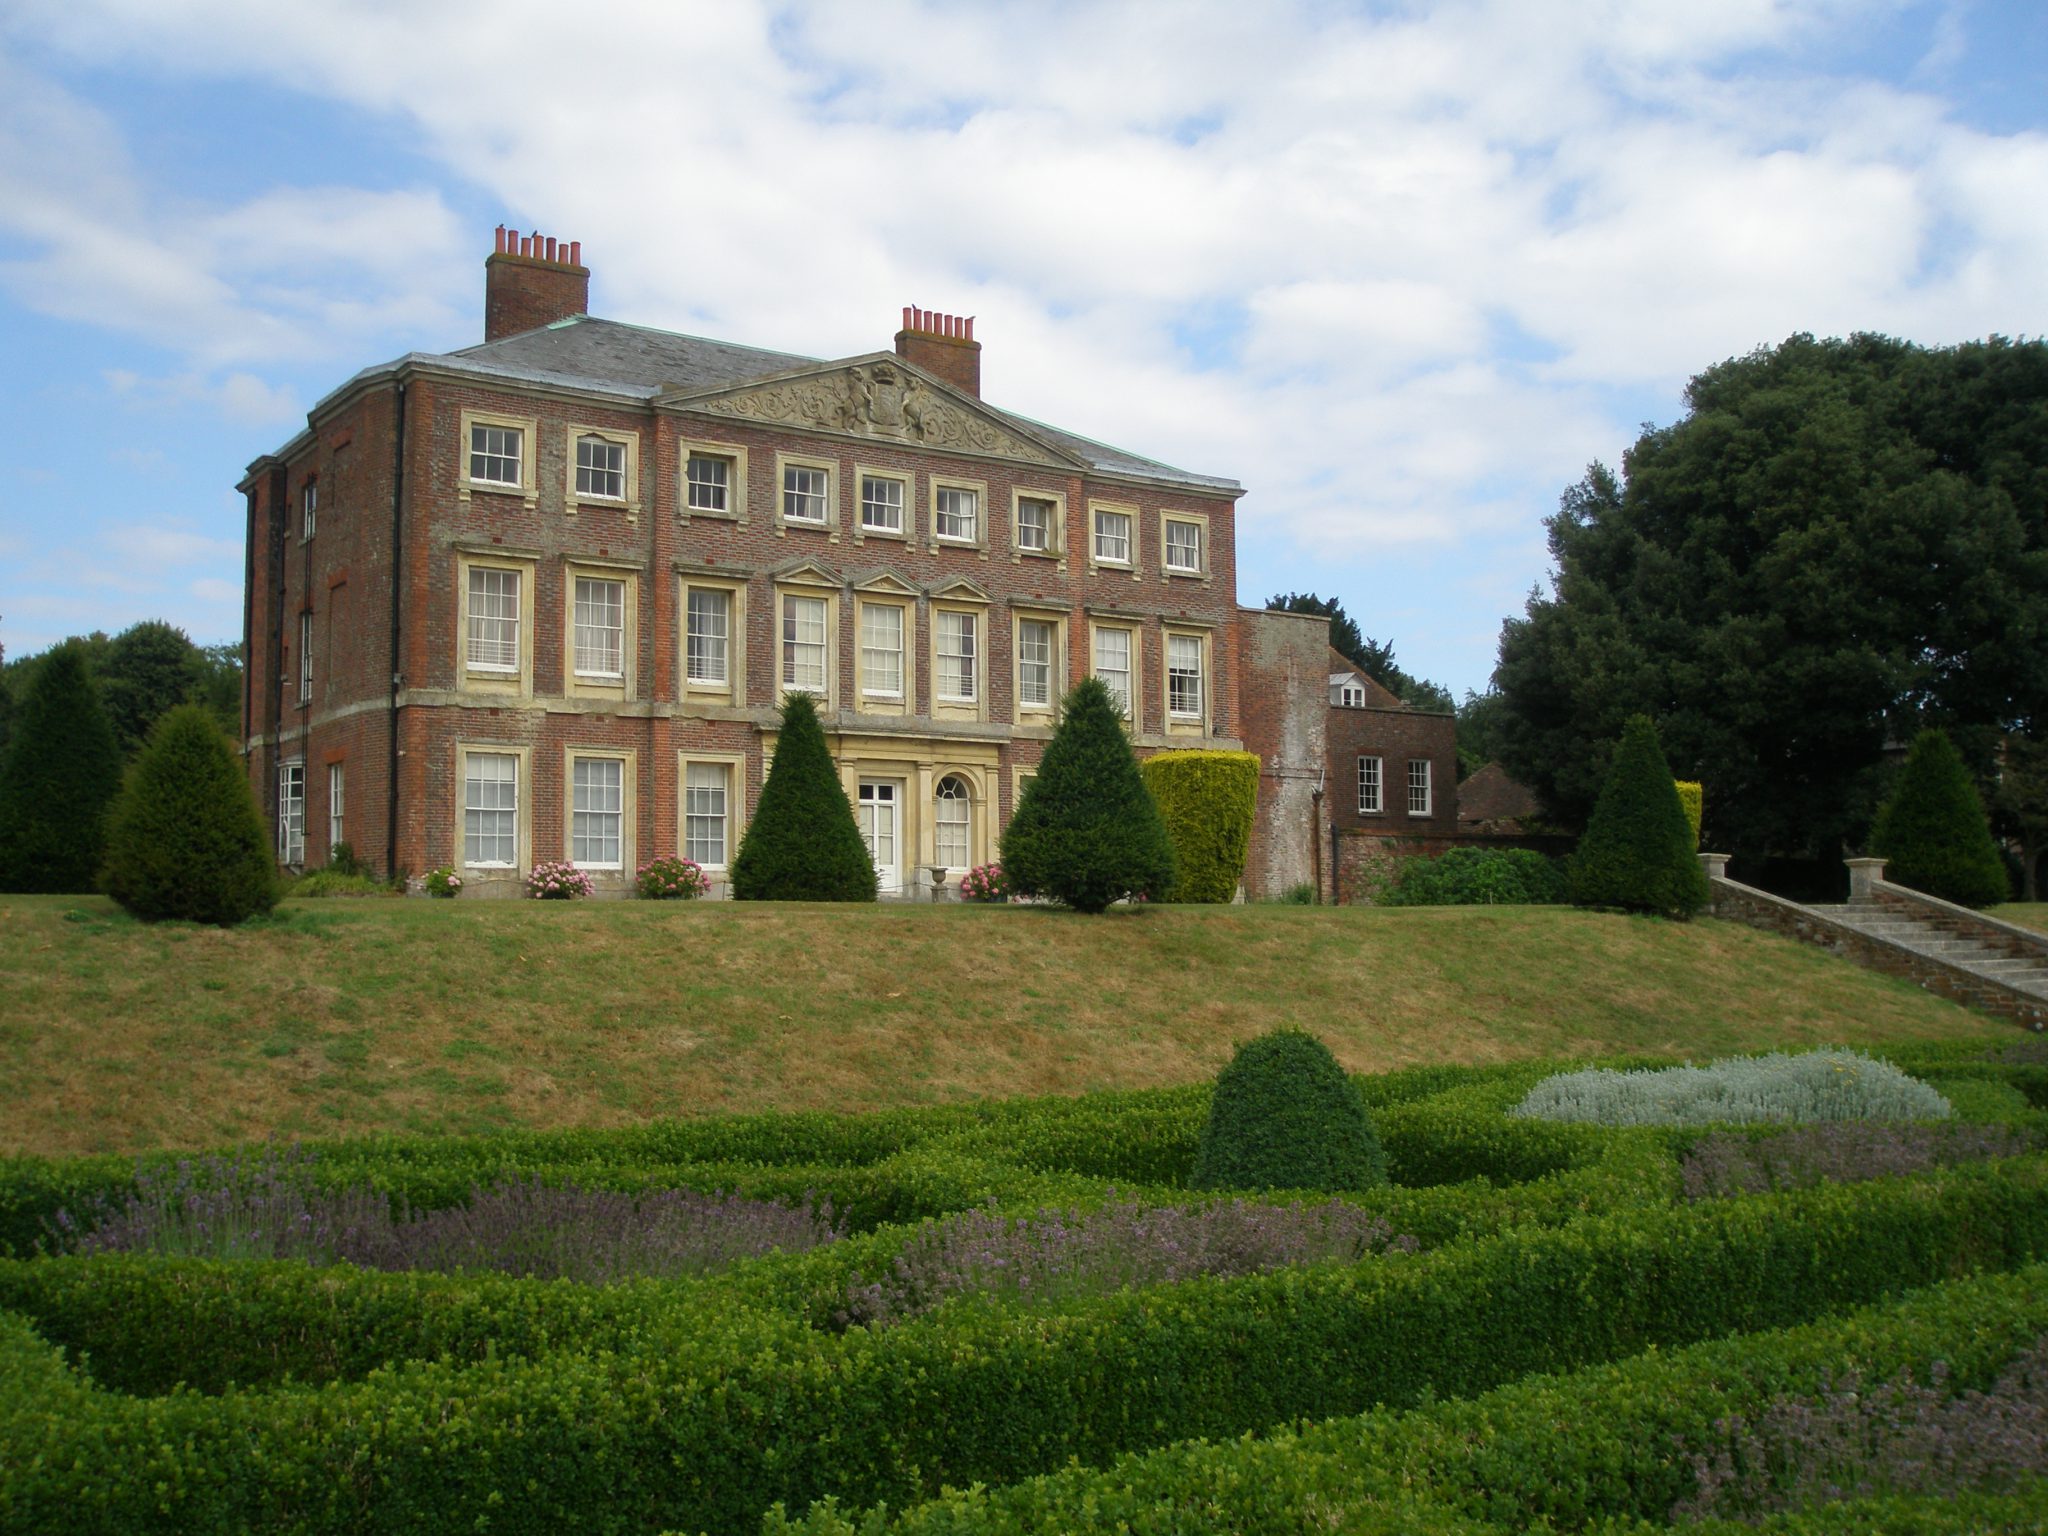 The East Face of the House overlooks a sunken Parterre, which was created in 2000.